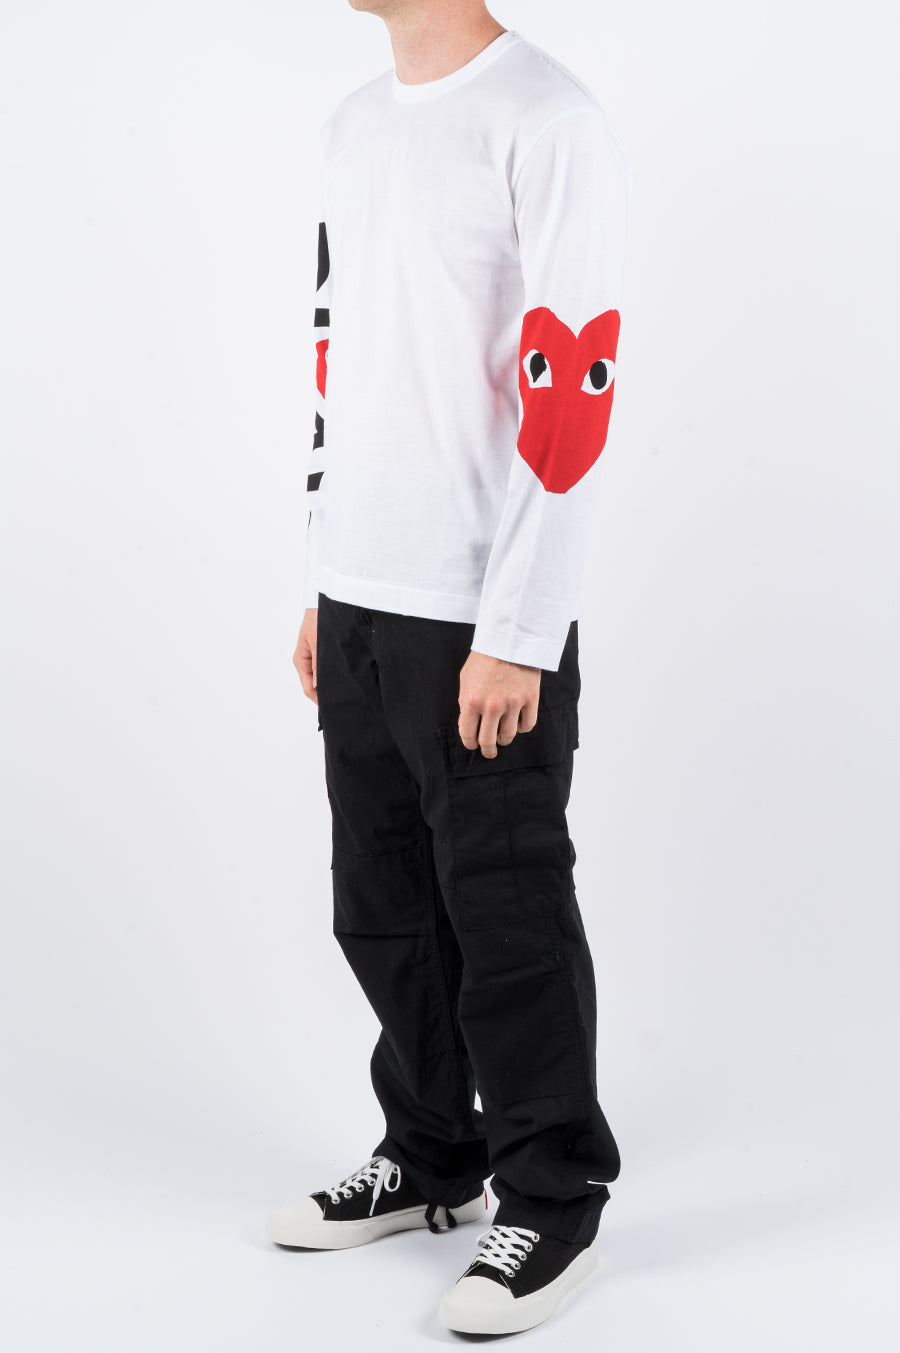 OVERSIZED PLAY – WHITE HEART DES PRINTED BLENDS GARCONS COMME SLEEVE LS